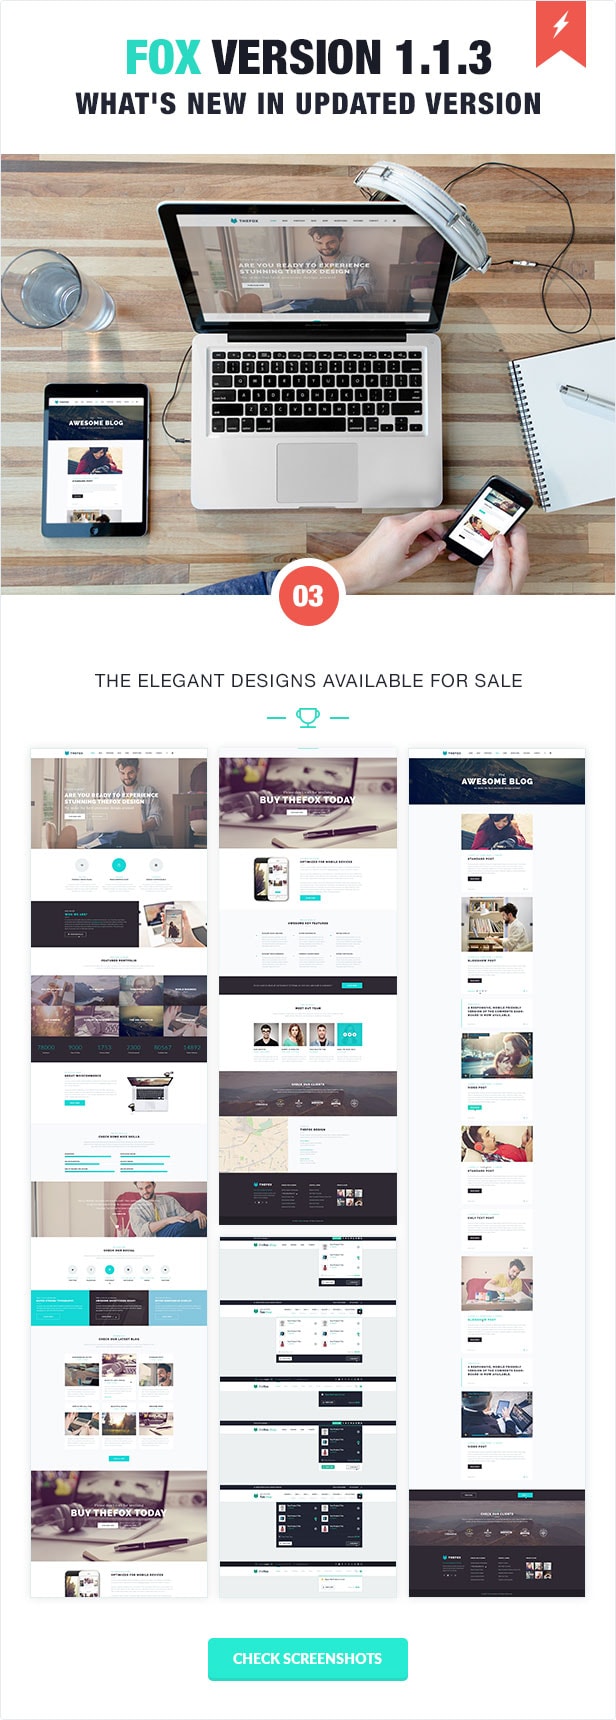 thefox psd template - the best on Envato Market - Themeforest's trending theme